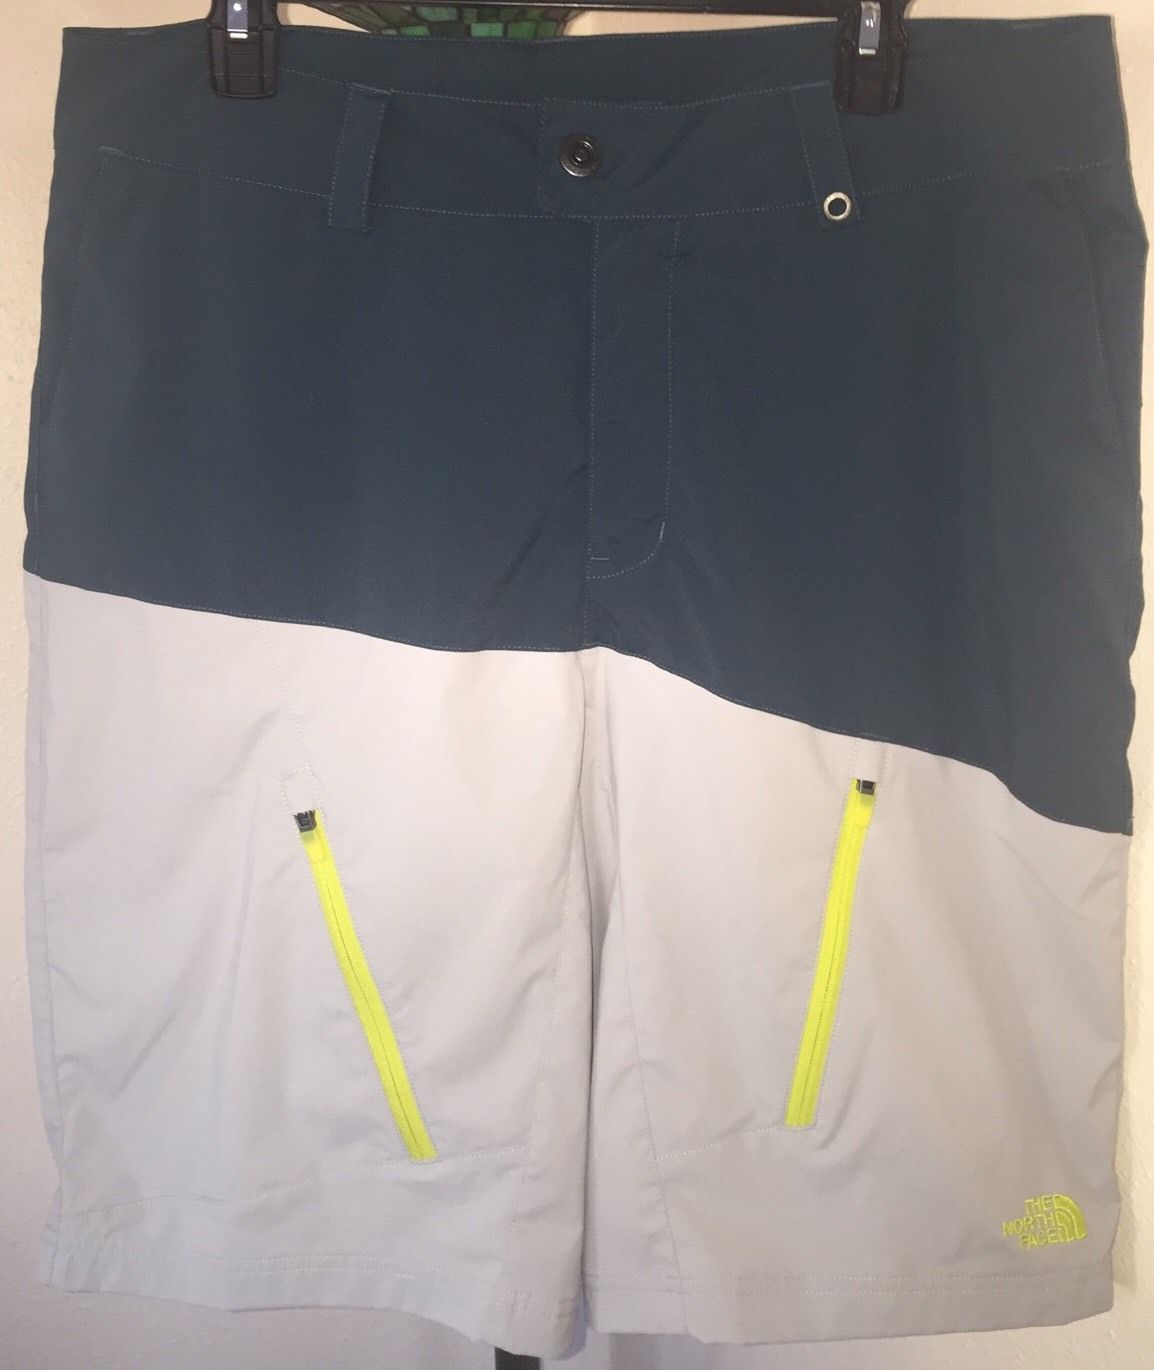 AWESOME MEN'S THE NORTH FACE VENTED HIKING TREKKING WATER SHORTS SZ 36 - $54.44